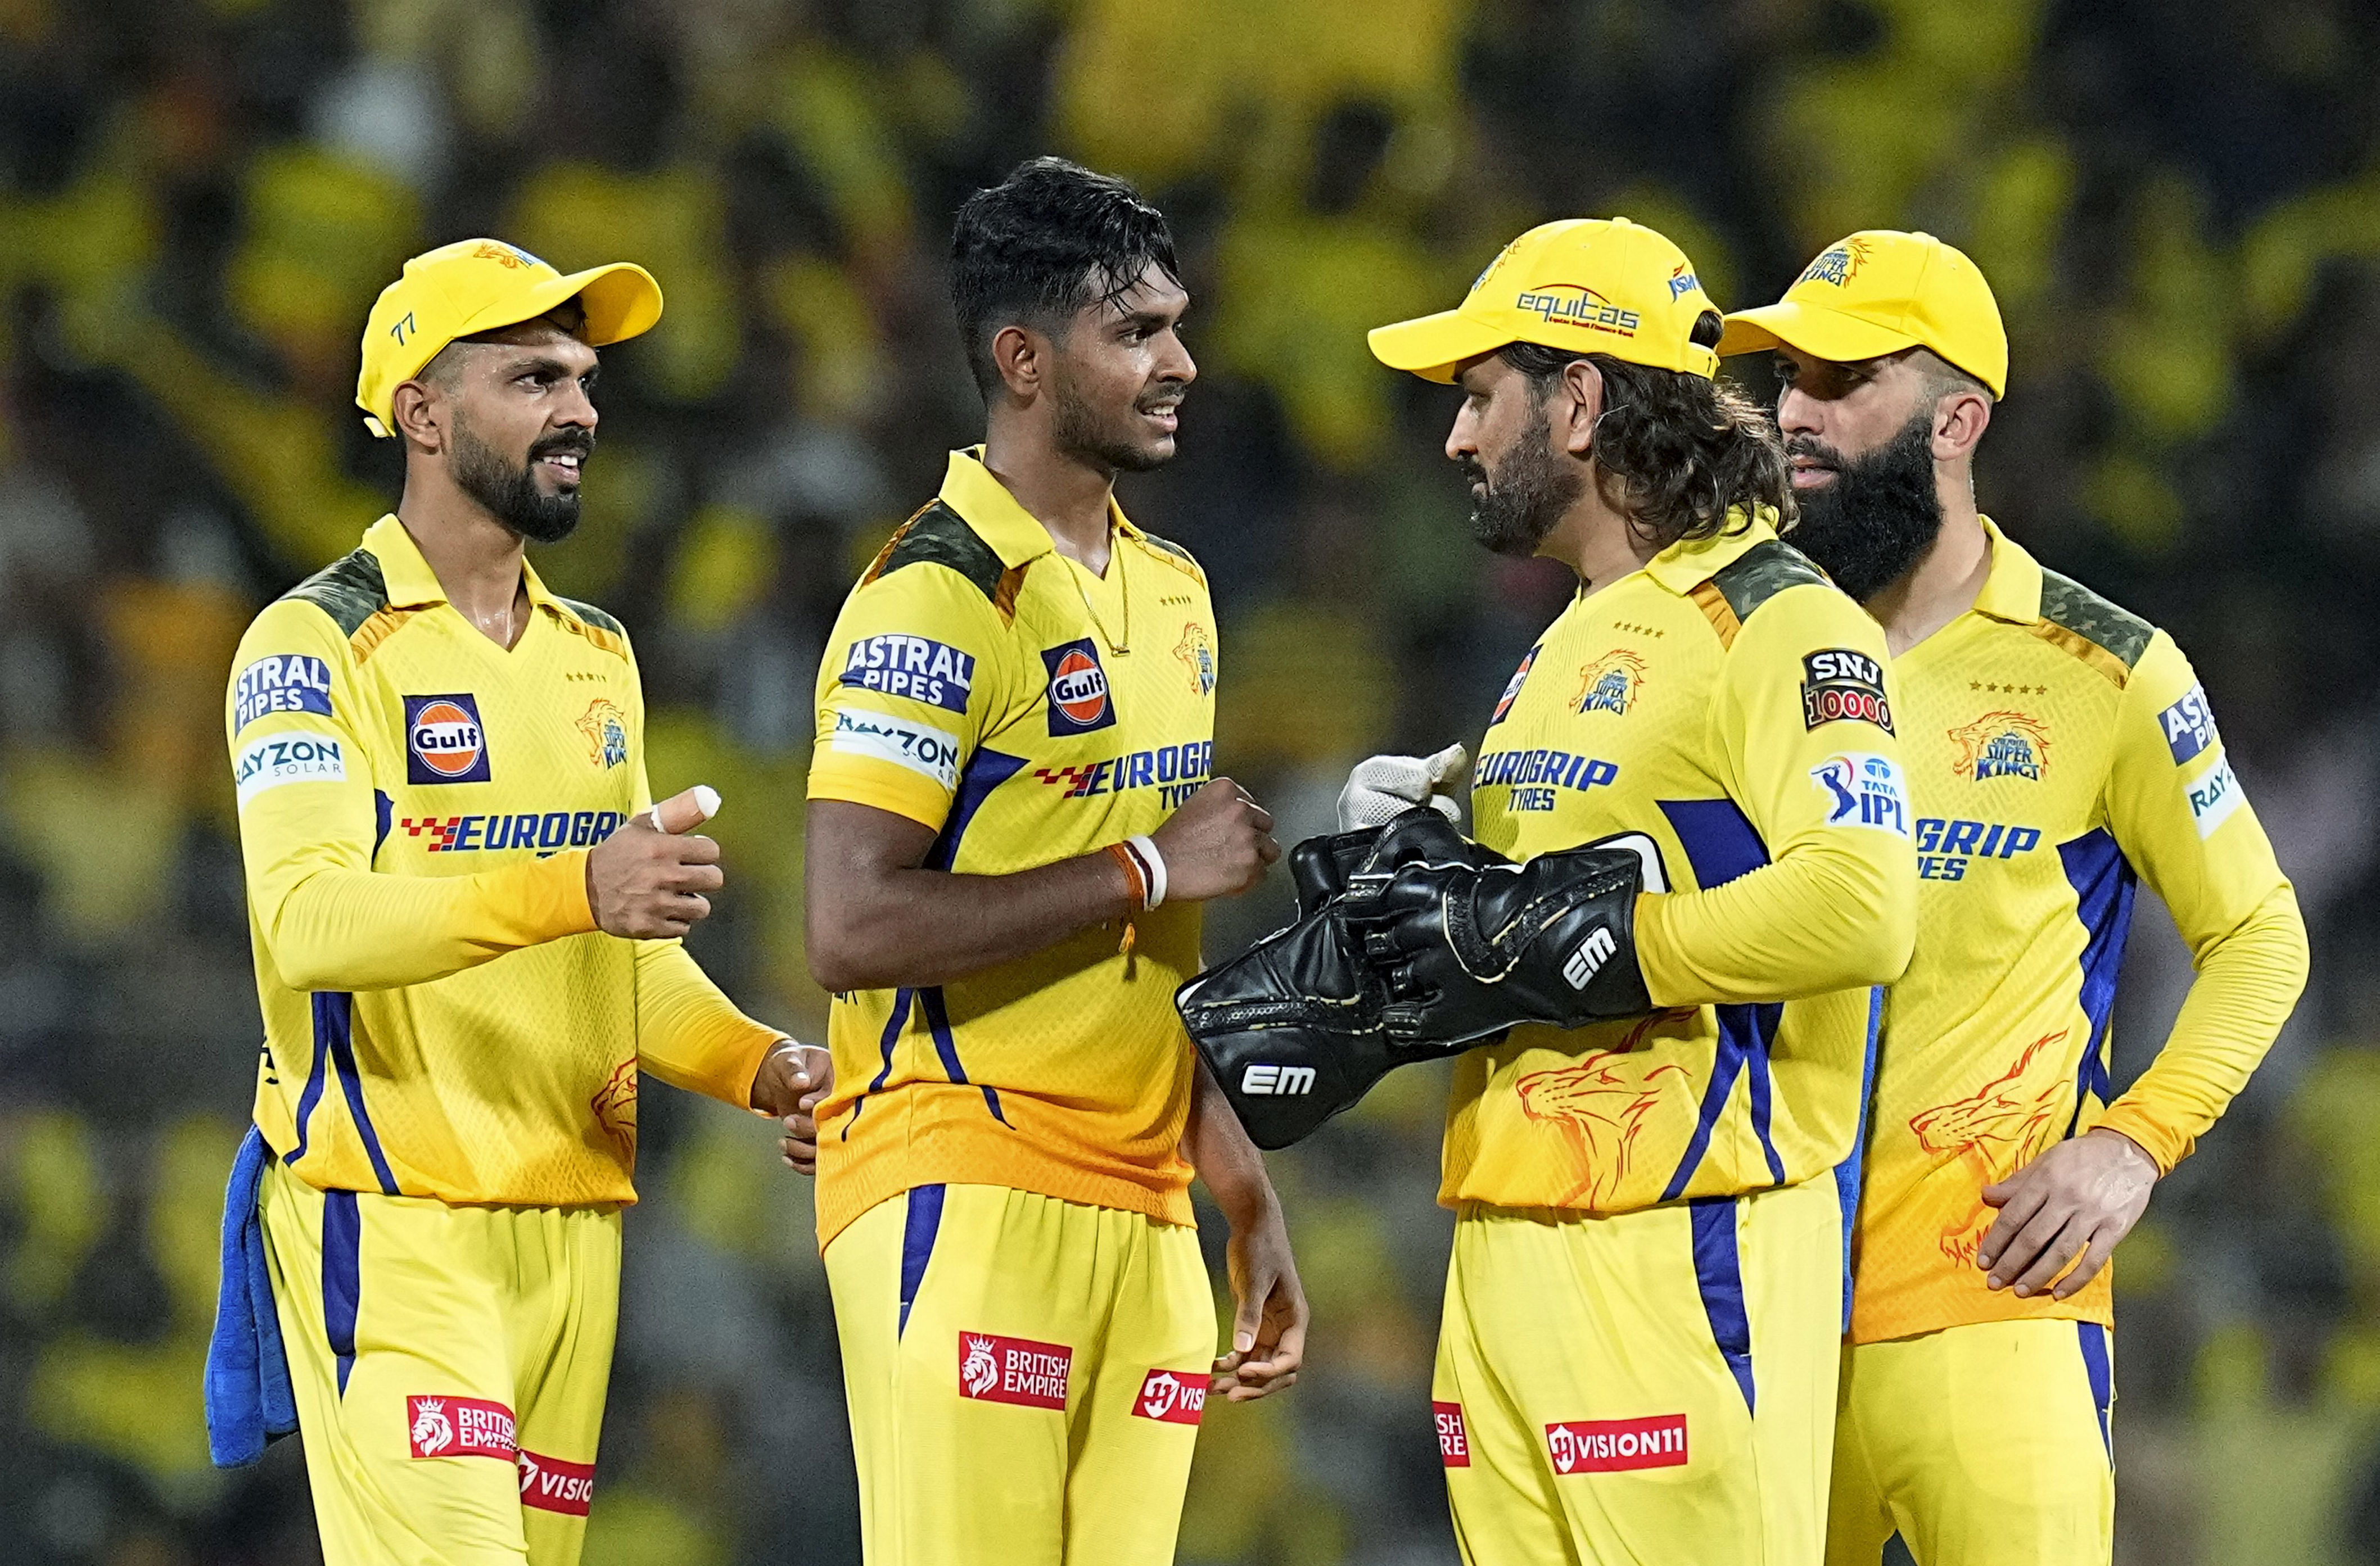 dhoni is playing my father's role in my cricket career : csk's matheesha pathirana